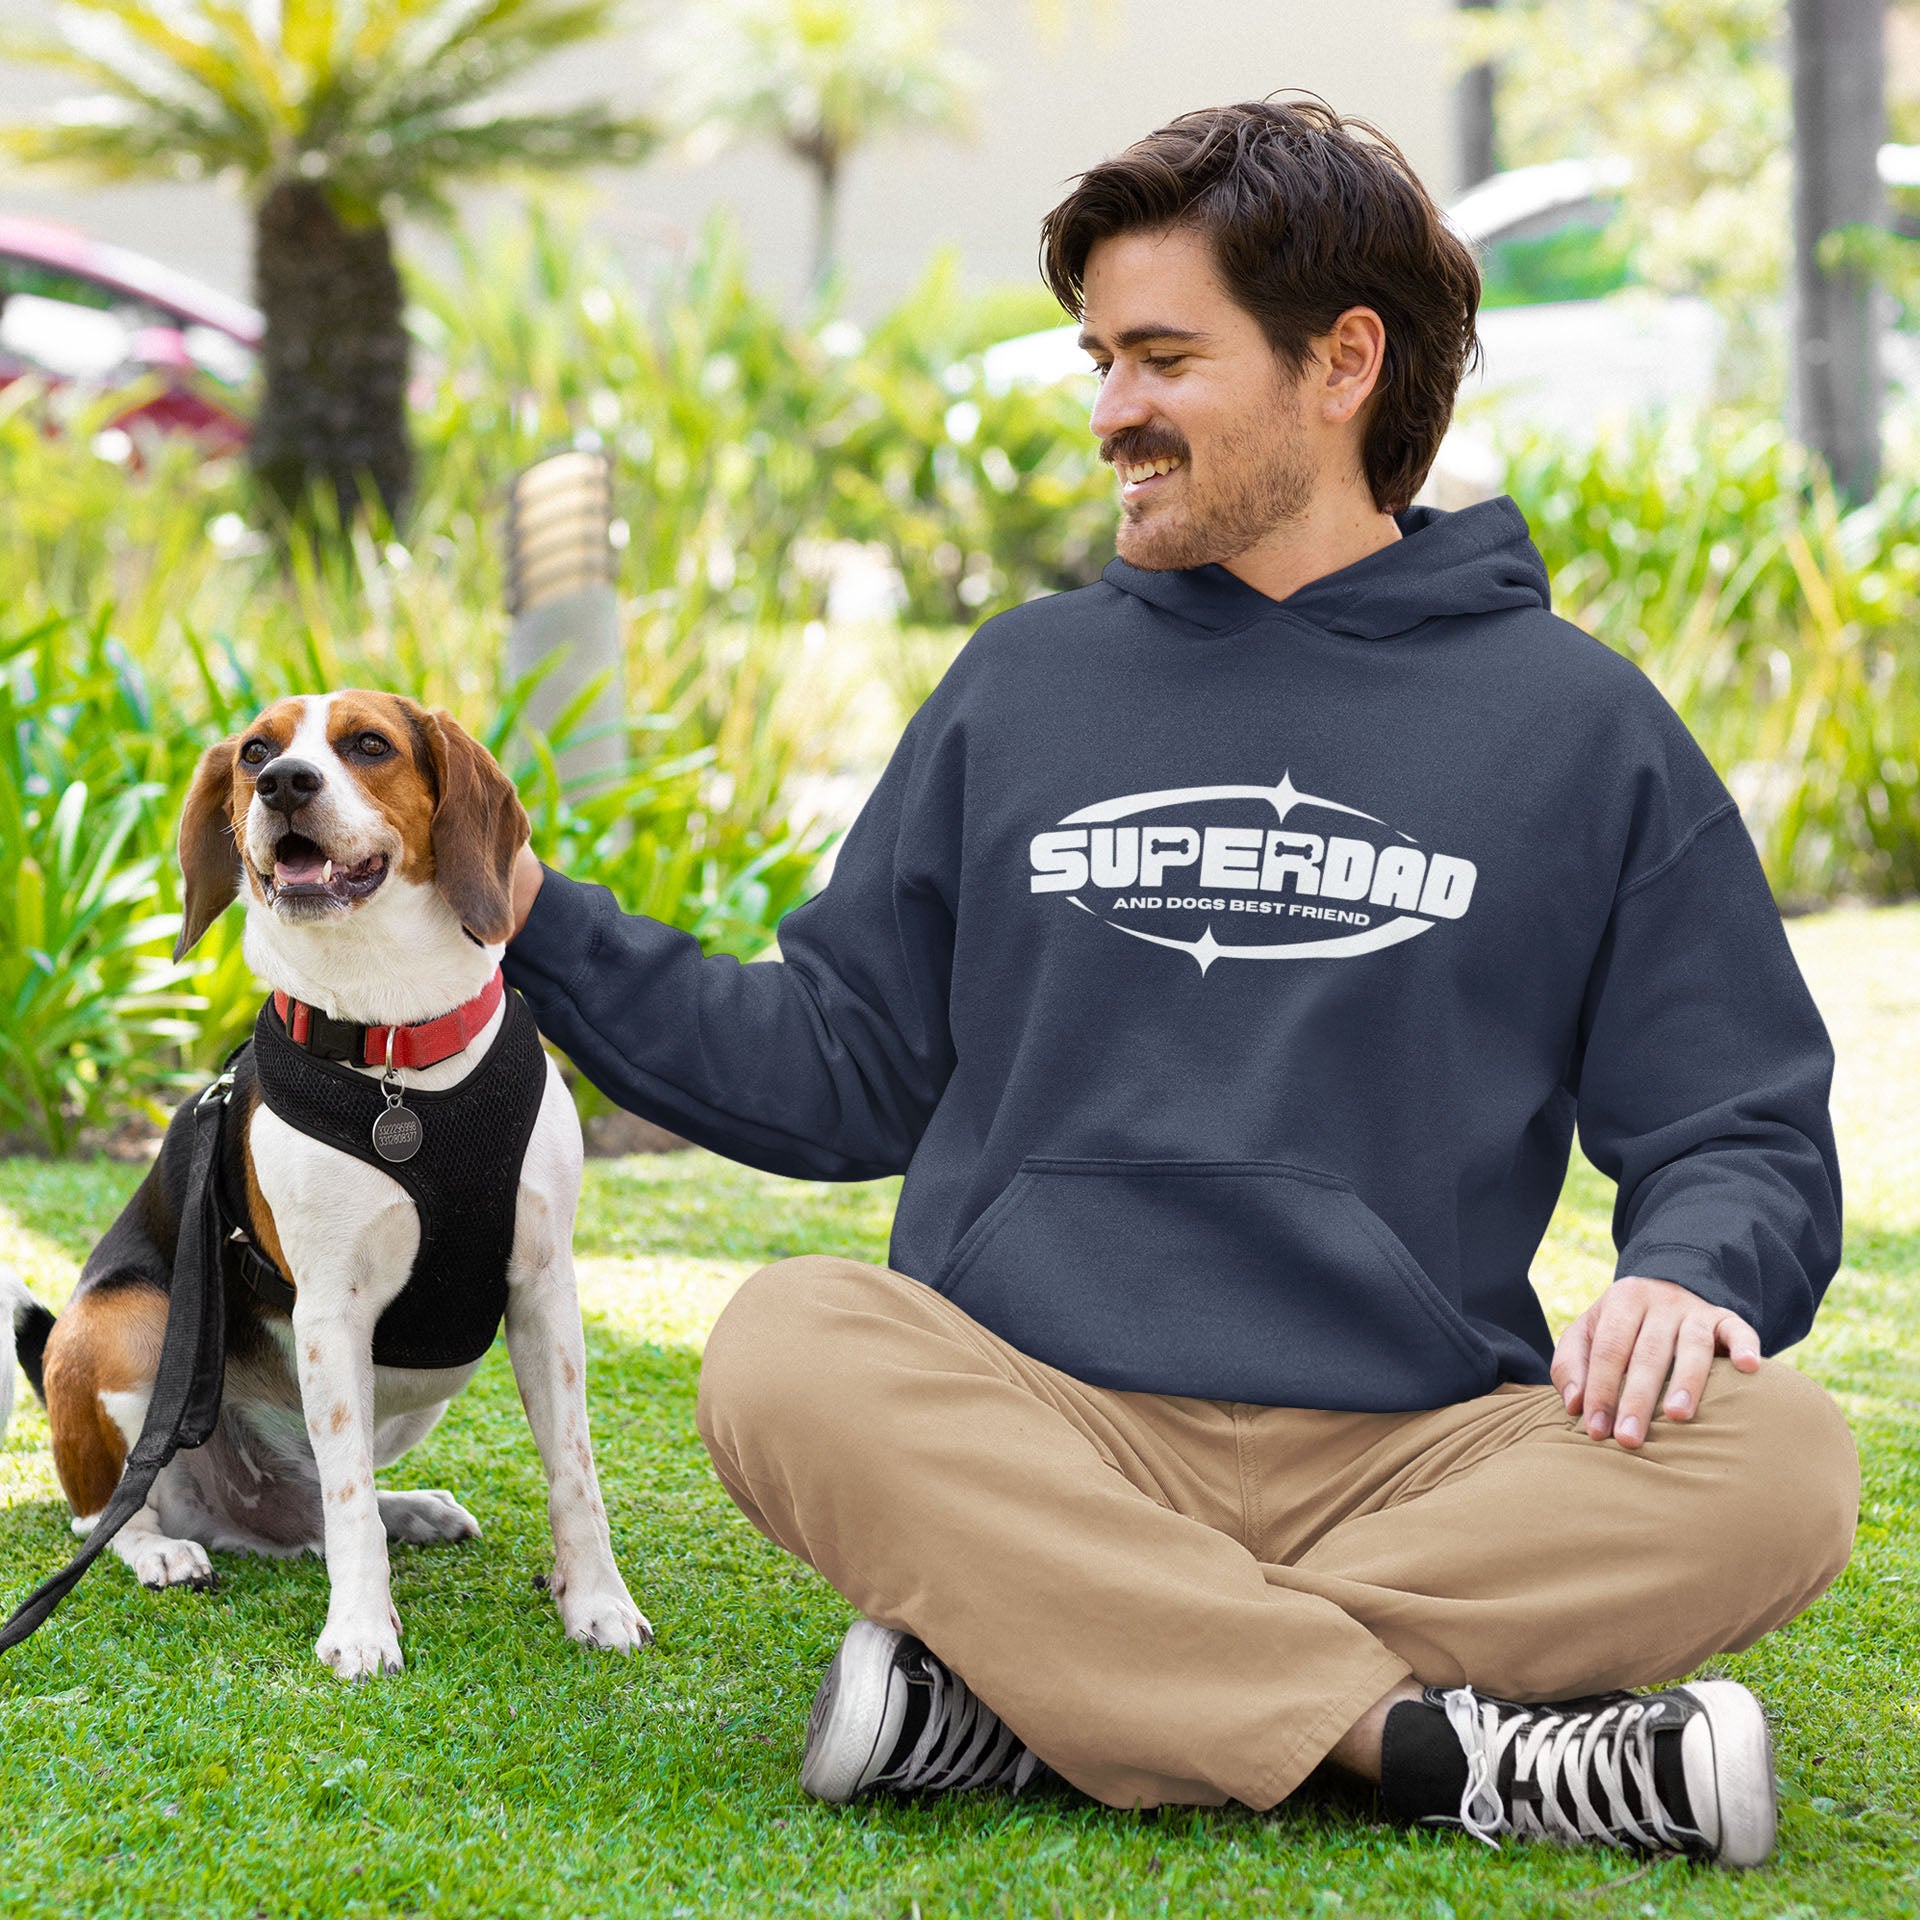  A man sits with his legs crossed next to his Beagle on the grass, he wears a 'Superdad' sweatshirt by Dogs Pure Love.